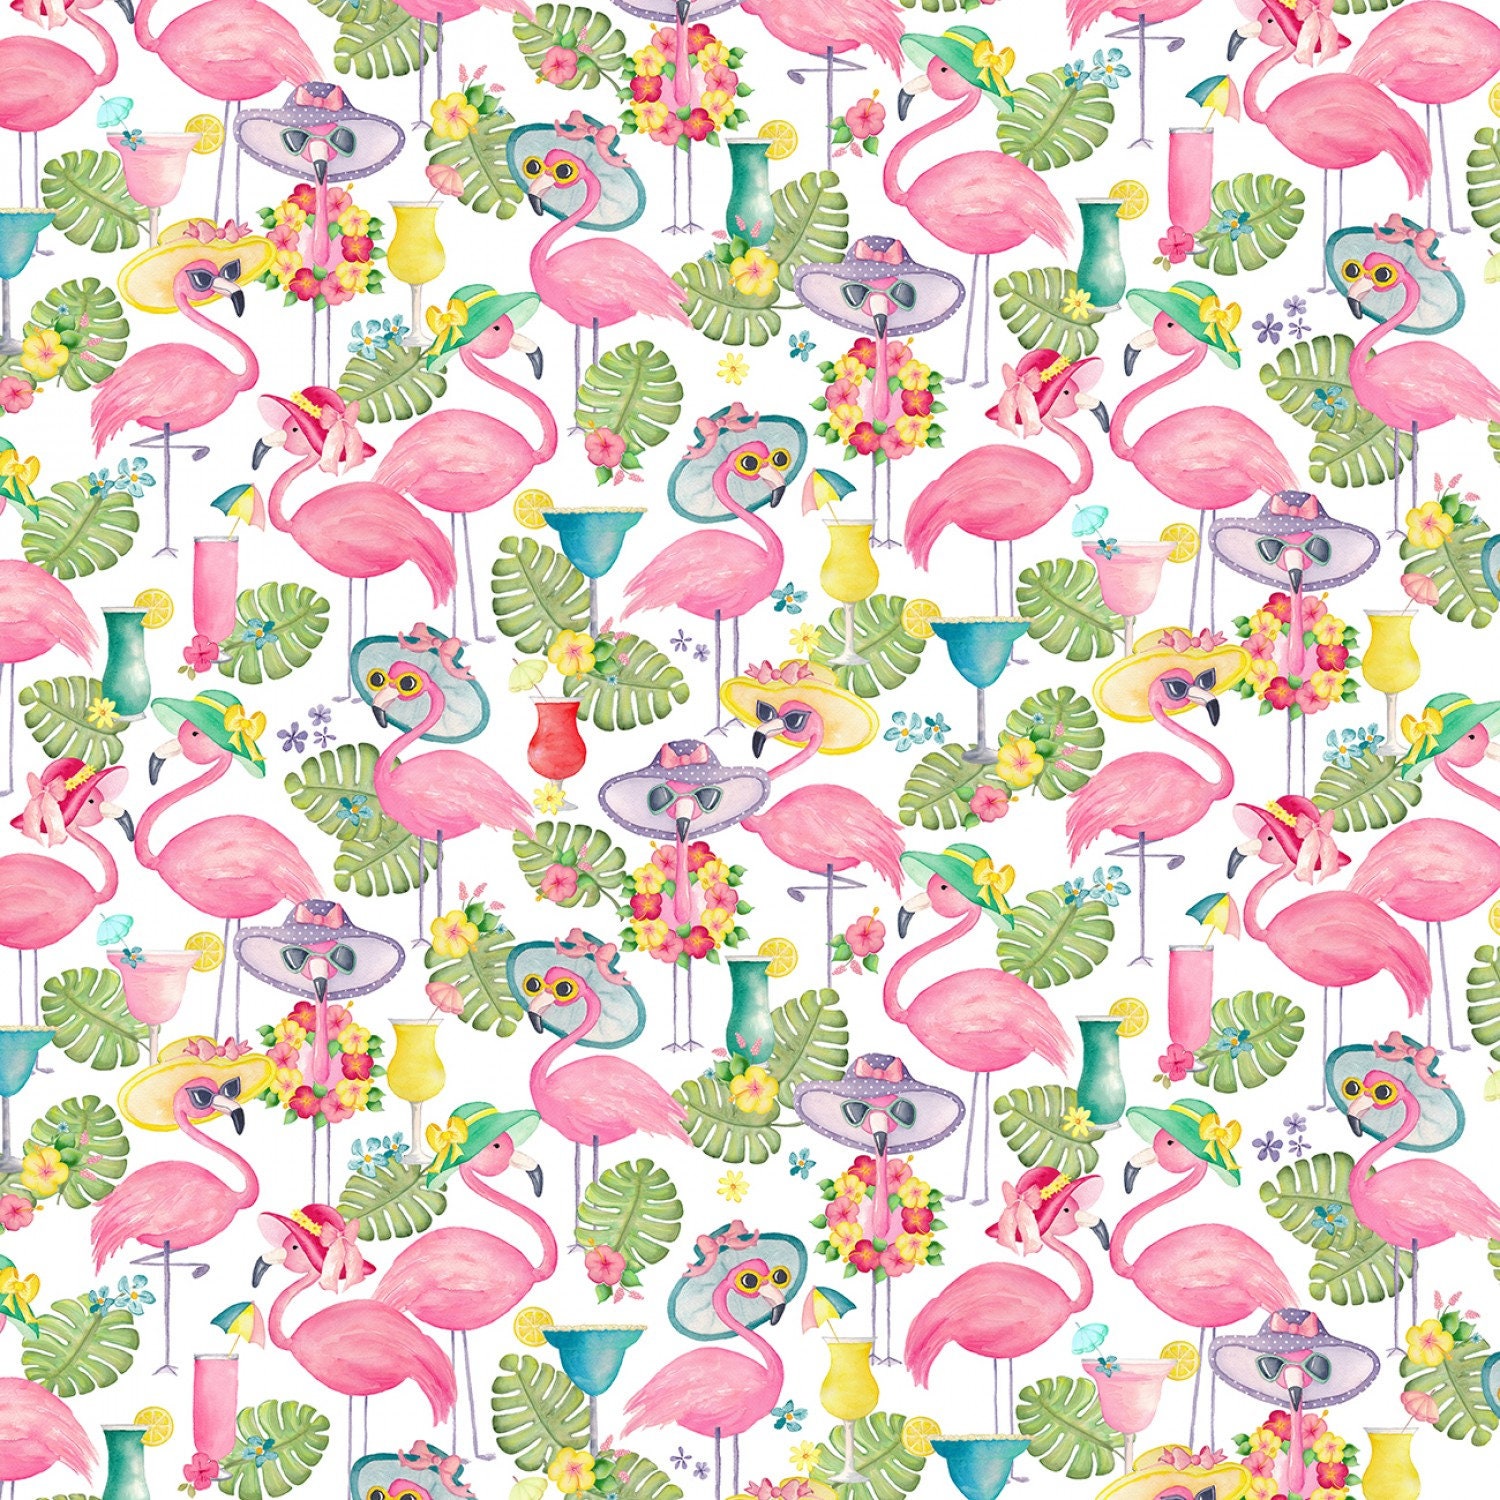 FUN in the SUN FLAMINGALS Flamingos on White Background by the Yard Kanvas  by Benartex Cotton Quilt Fabric 12590B-09 